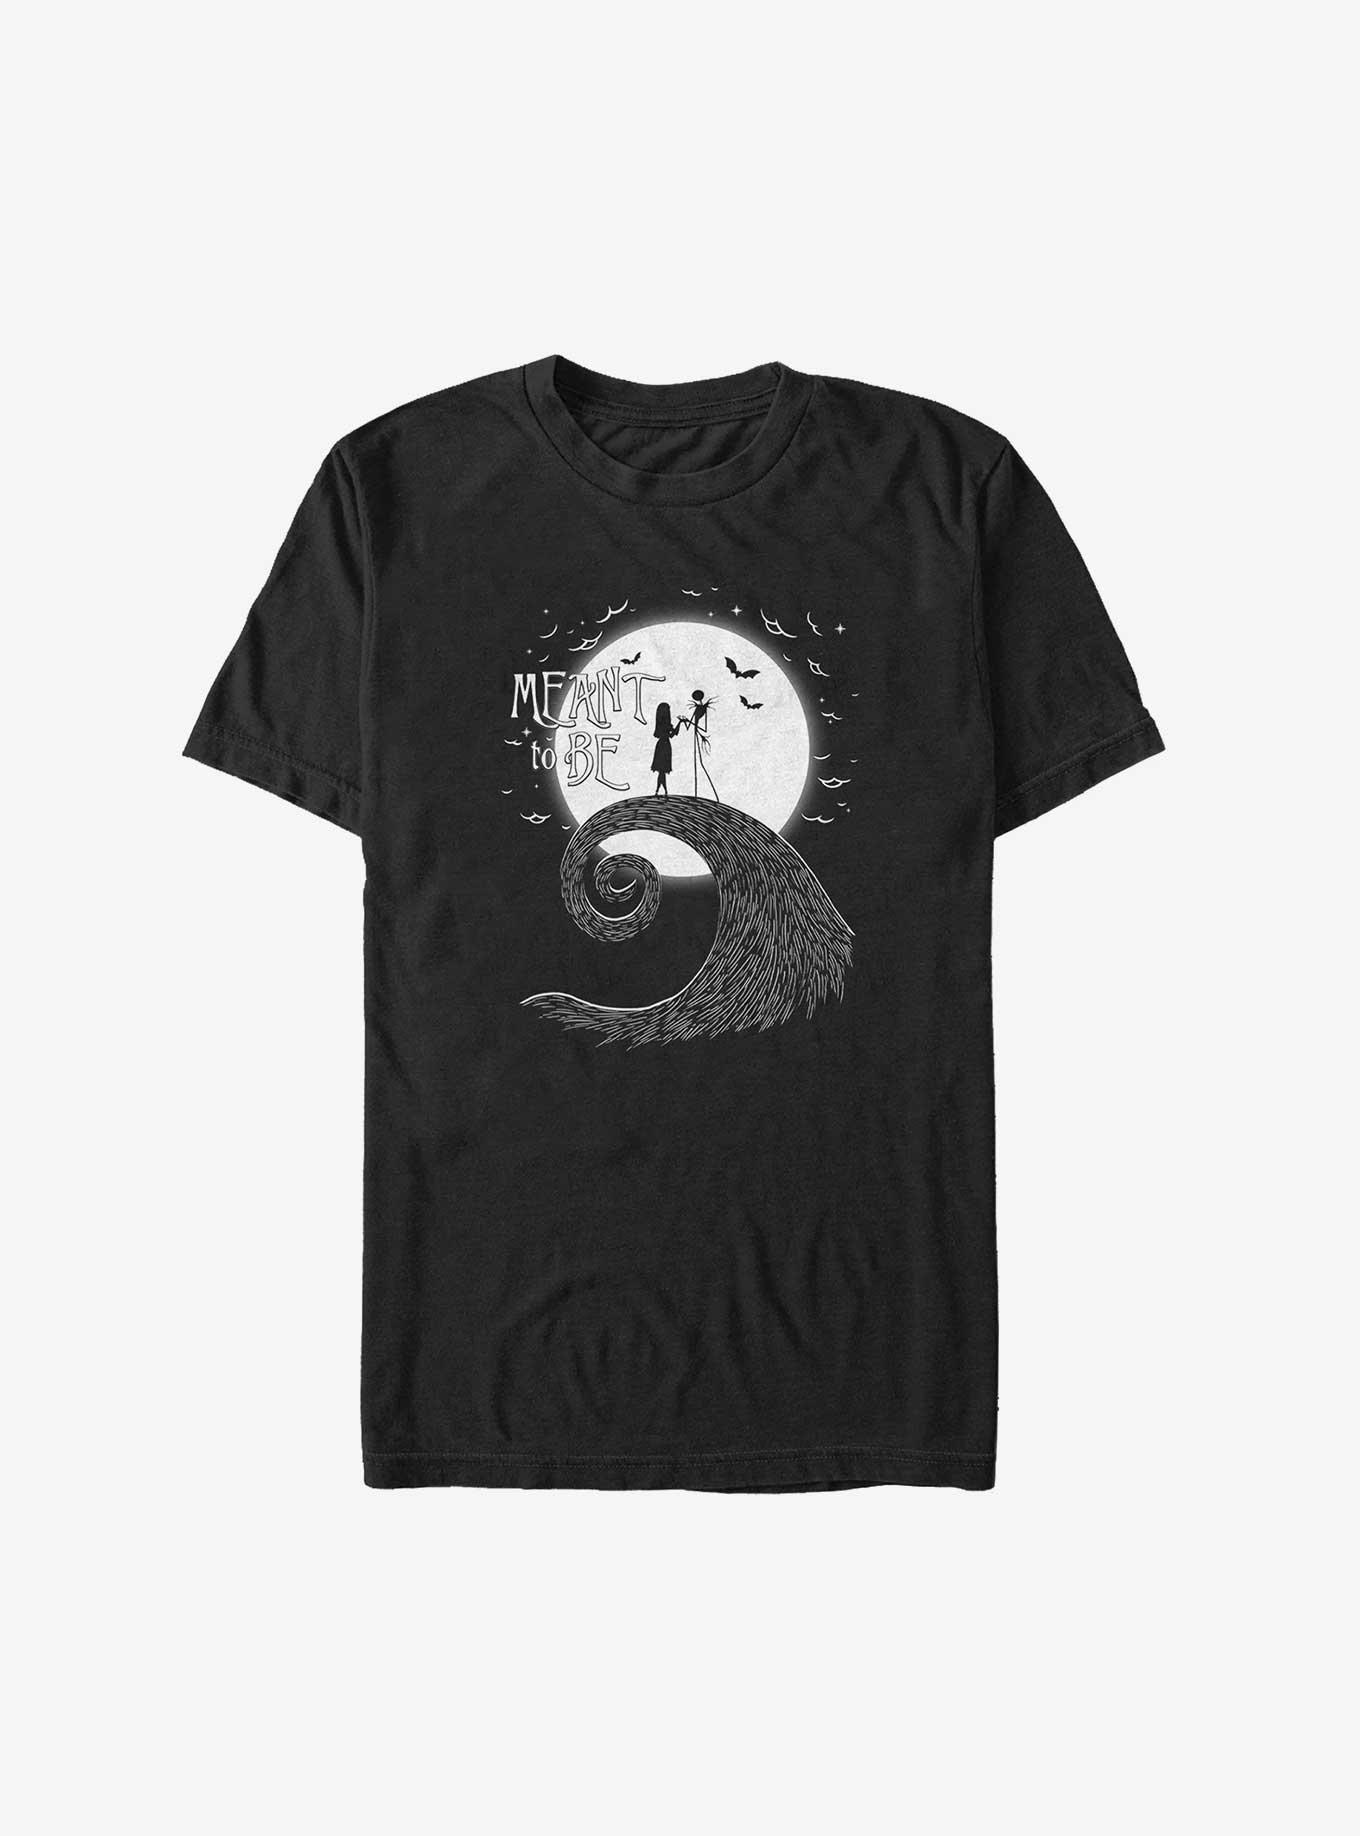 Disney The Nightmare Before Christmas Meant To Be Jack and Sally Big & Tall T-Shirt, BLACK, hi-res